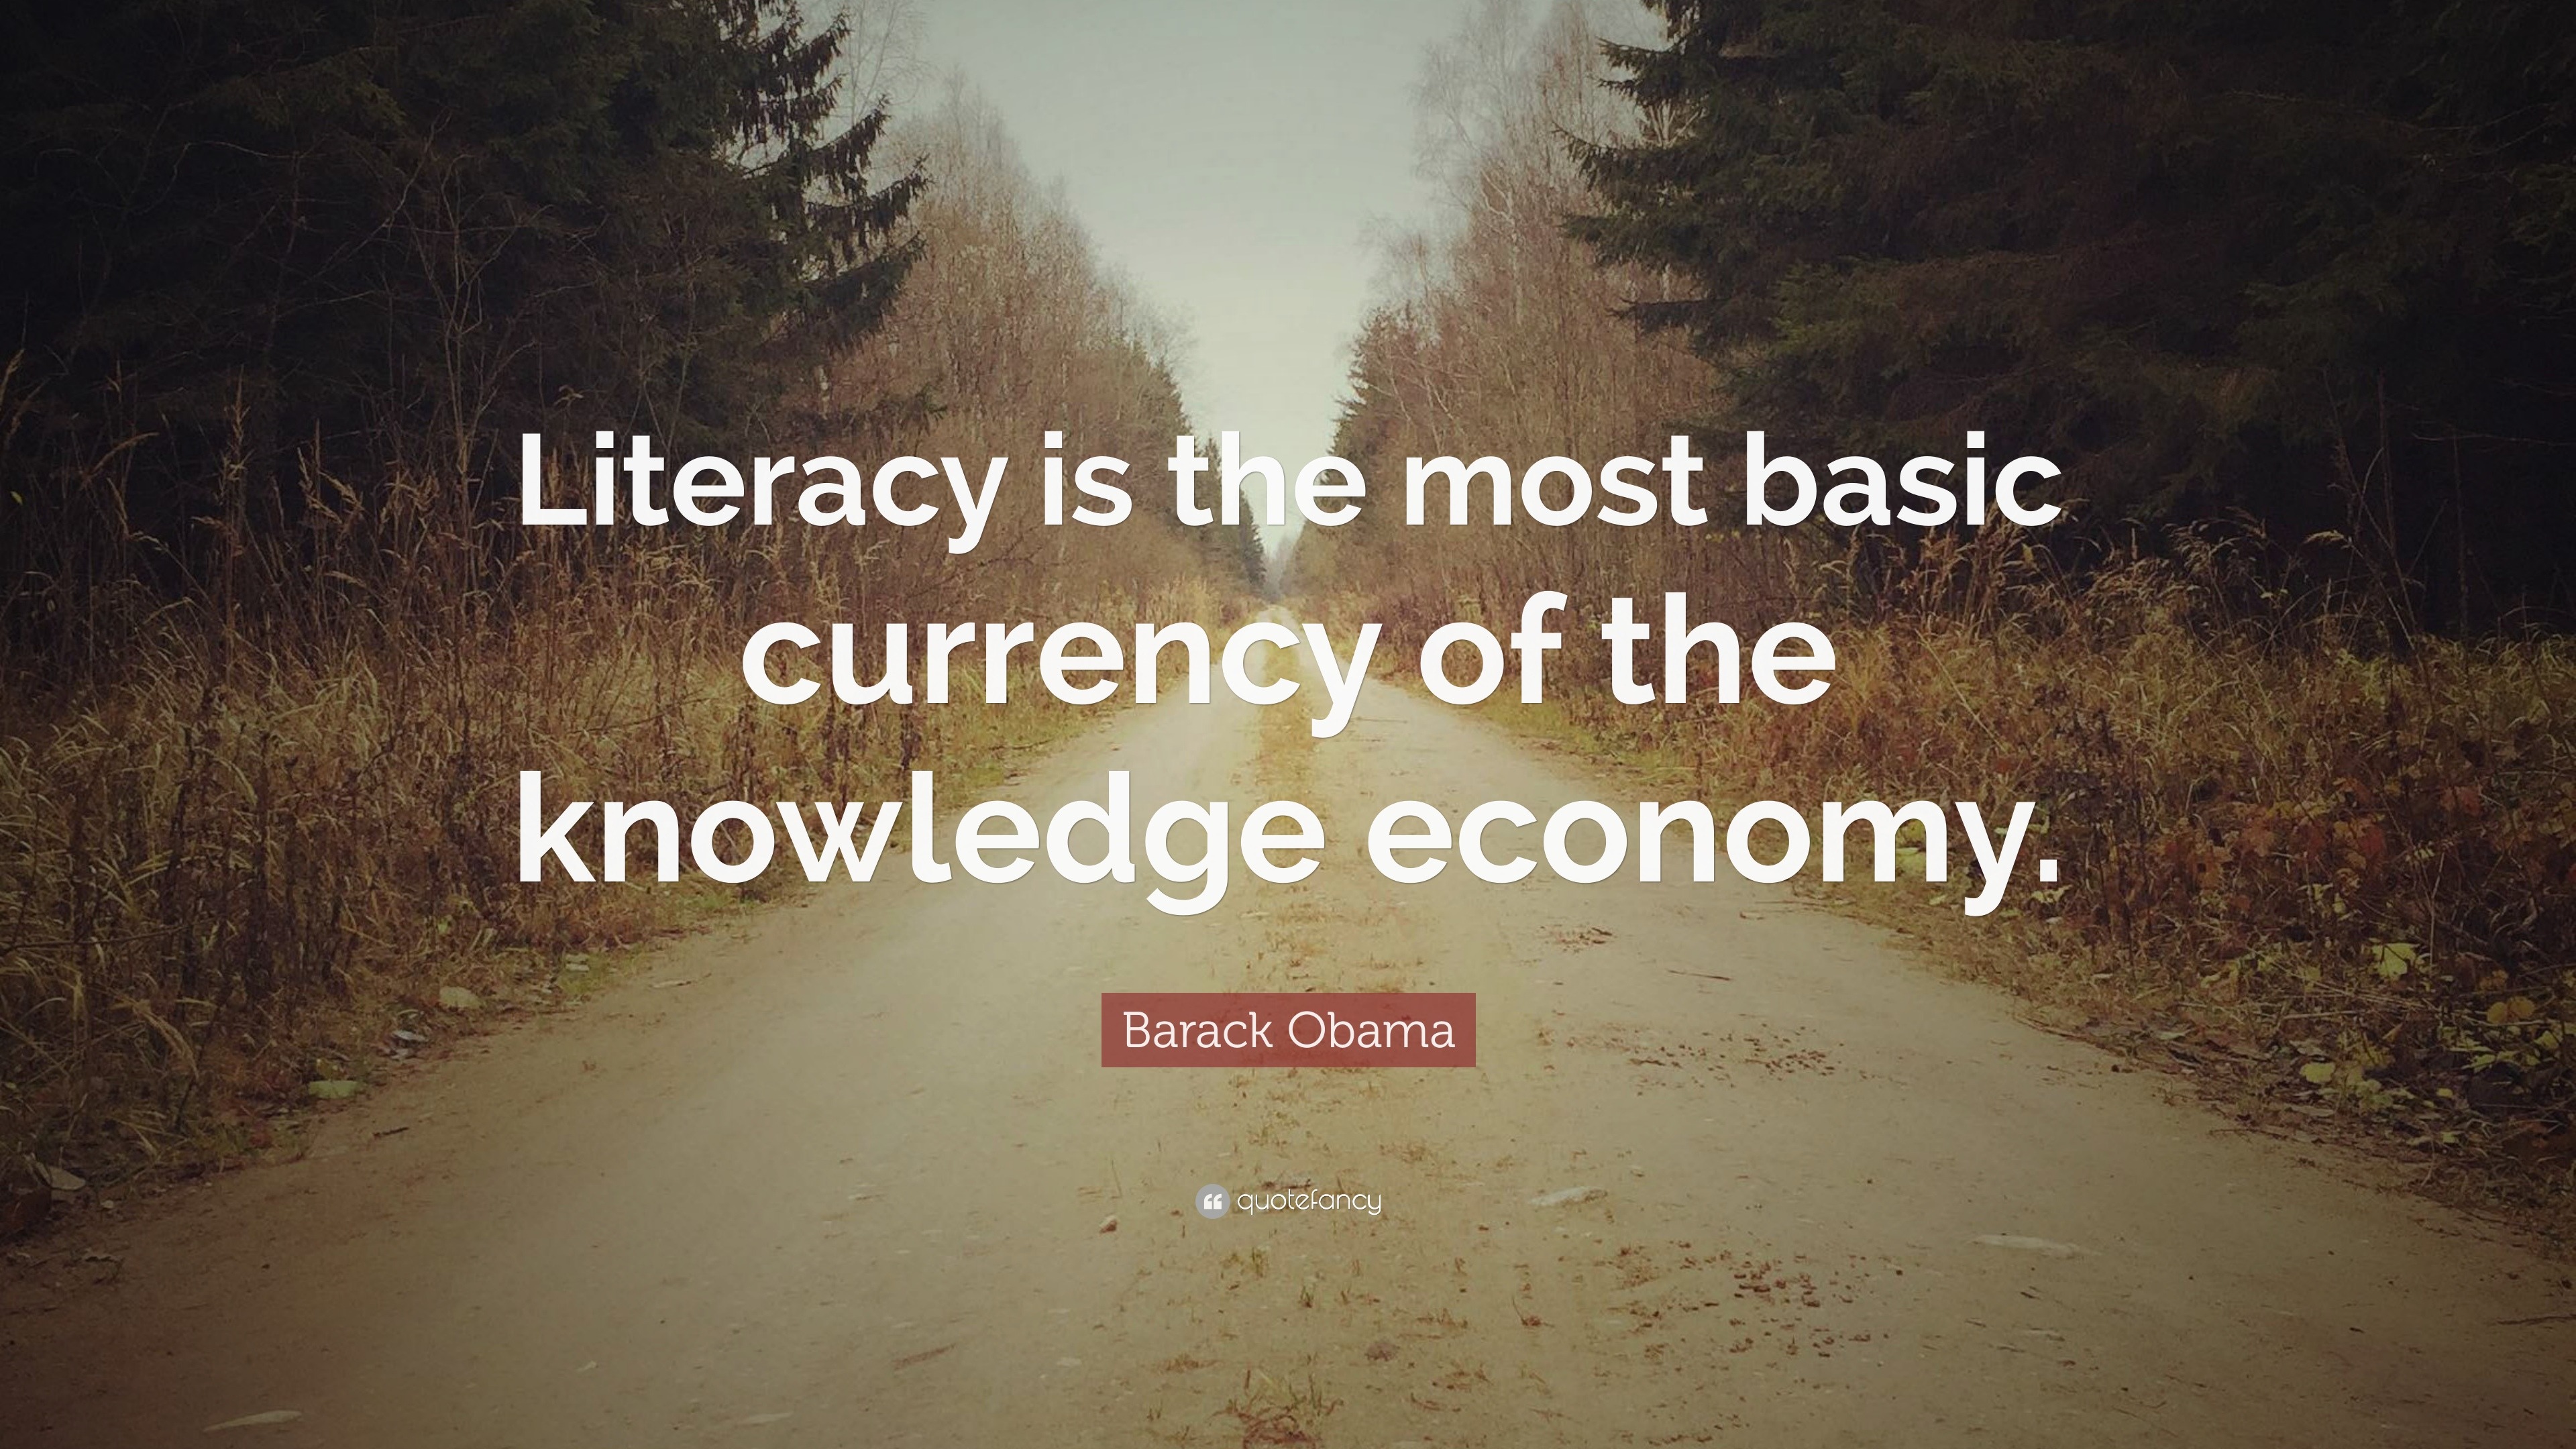 Barack Obama Quote: “Literacy is the most basic currency of the